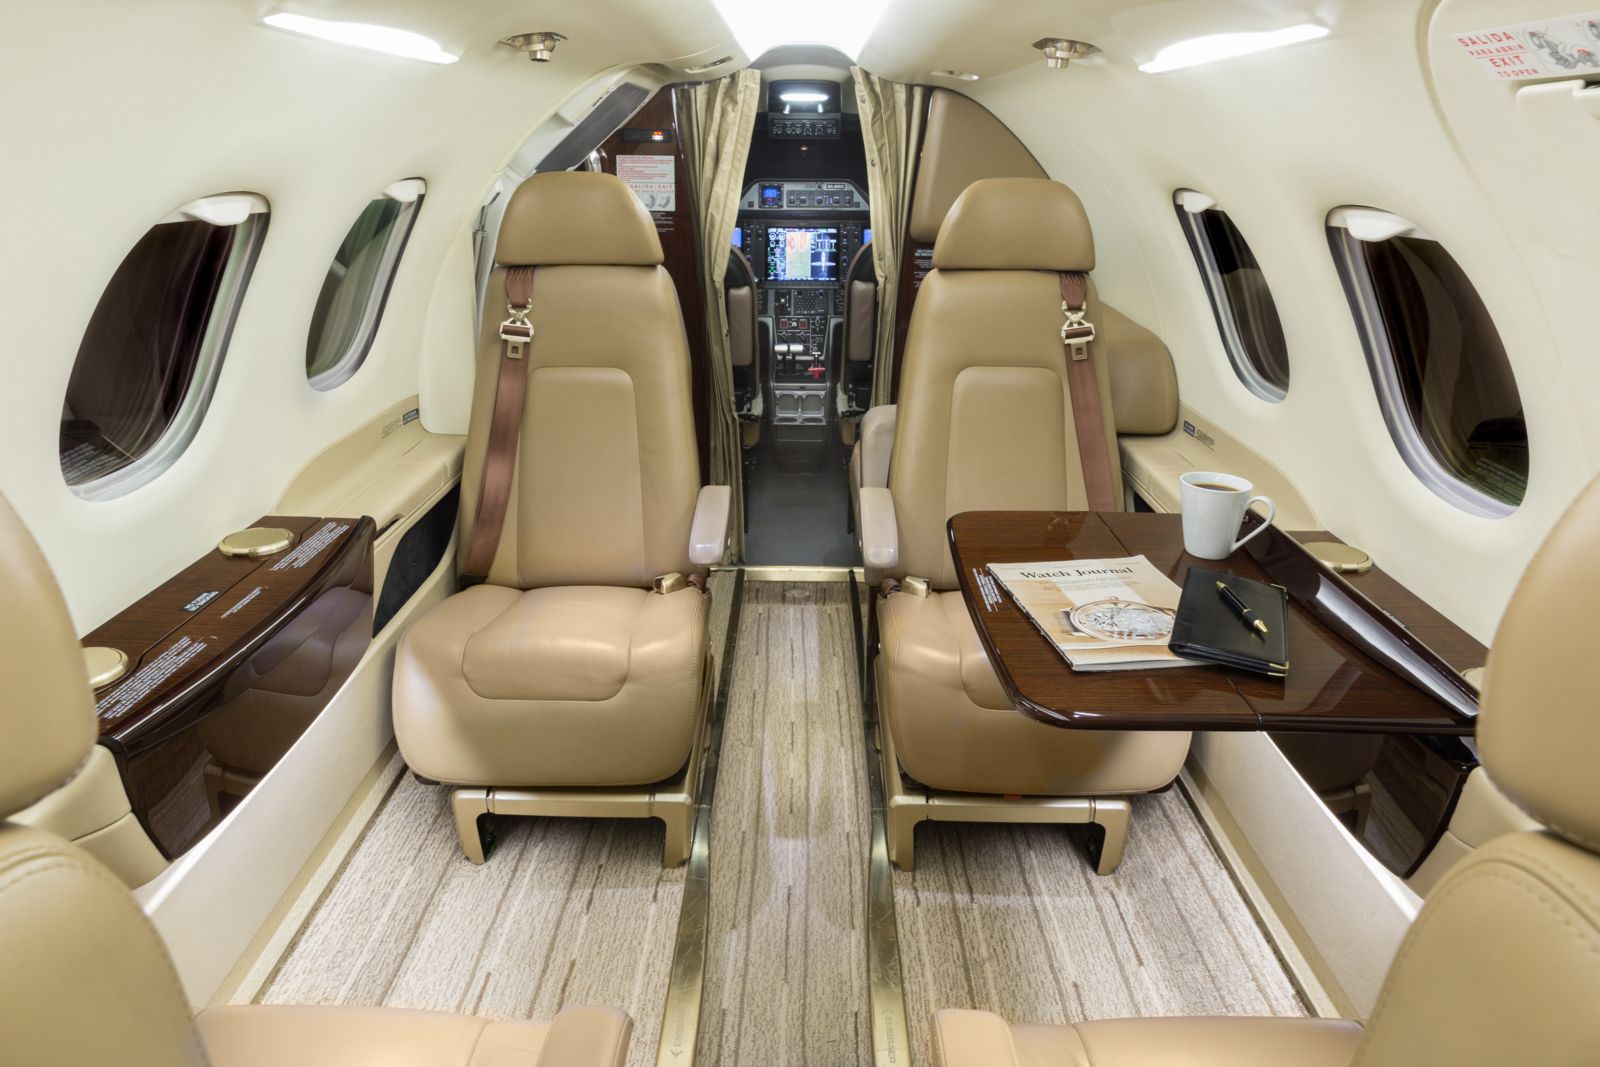 Embraer Phenom 100  S/N 50000347 for sale | gallery image: /userfiles/images/Phenom100_sn347/aft%20fwd.jpg